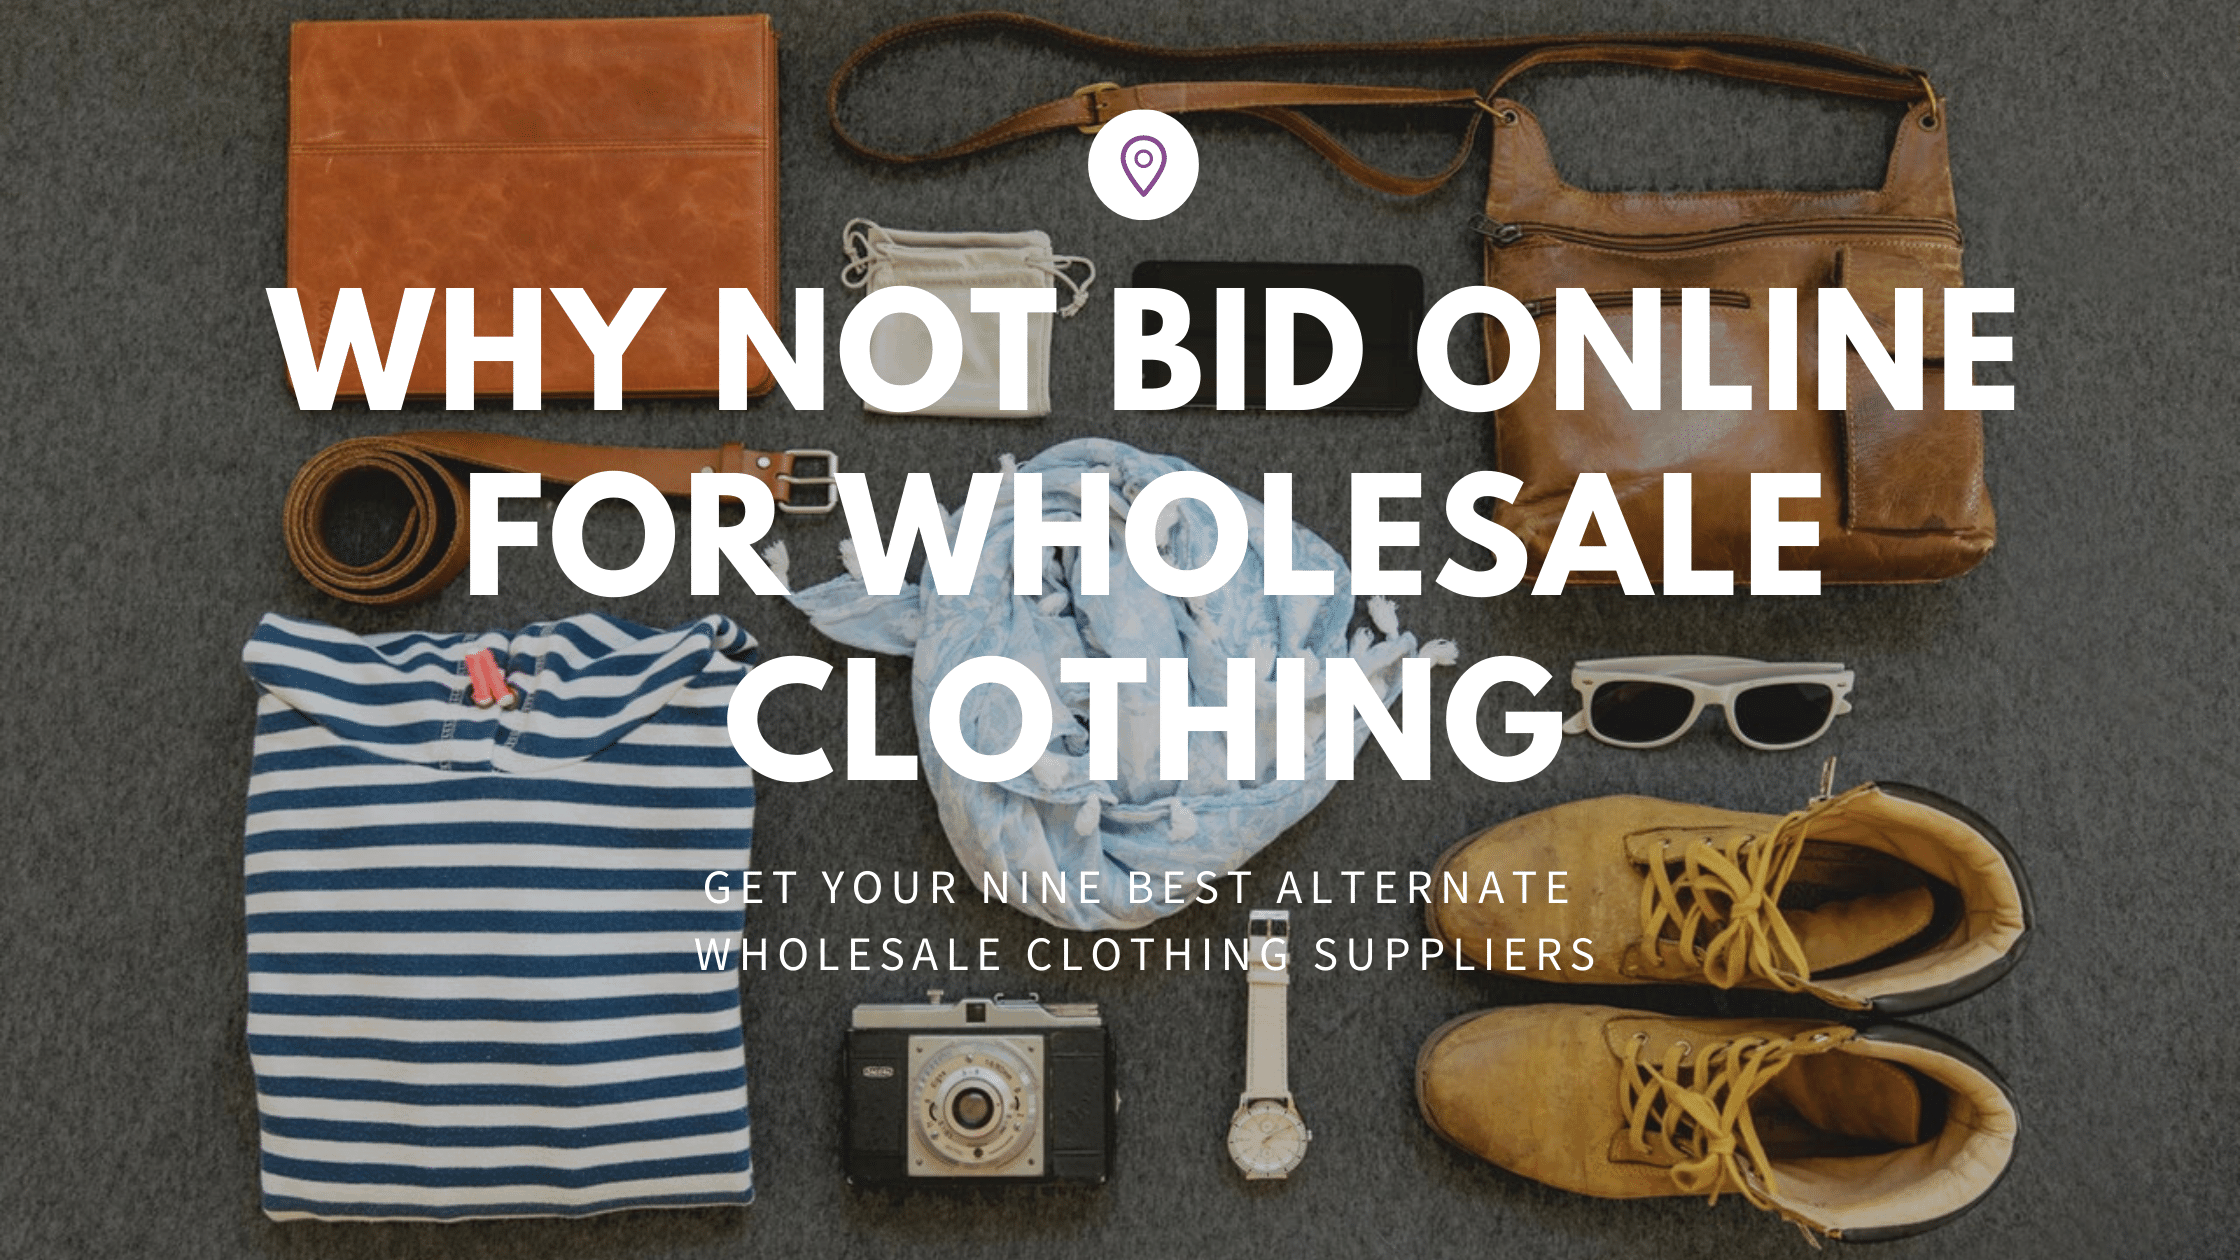 Your 9 Most Affordable Wholesale ...